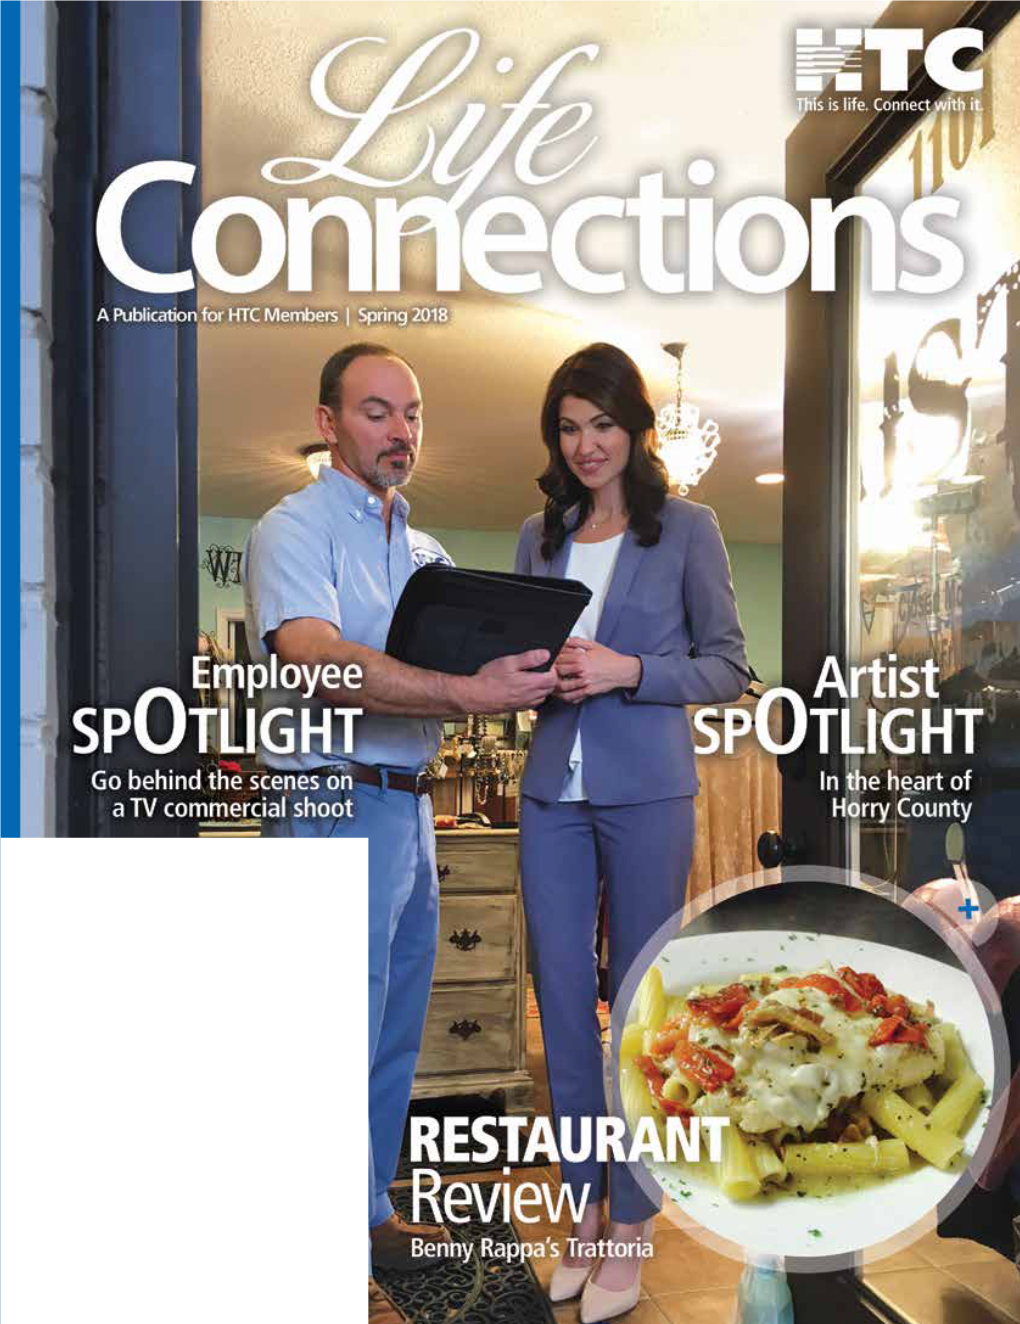 Spring 2018 Publisher Info: Life Connections, a Magazine for Cooperative Members, Is a Publication of HTC, Inc